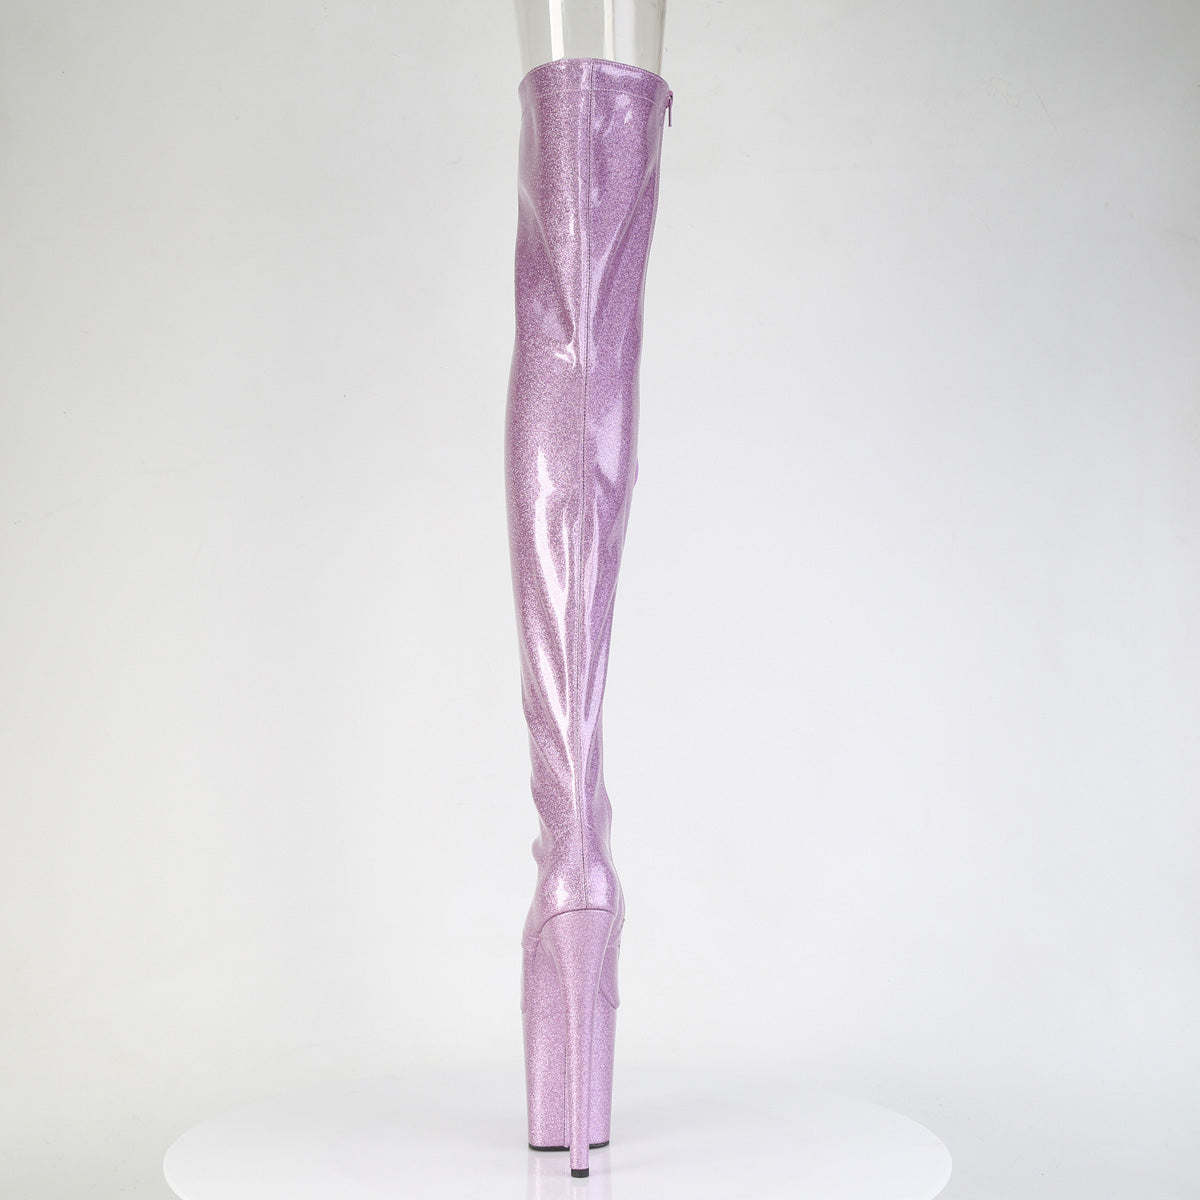 FLAMINGO-3021GP Lilac Glitter Pleaser Pole Dancing Thigh Boots